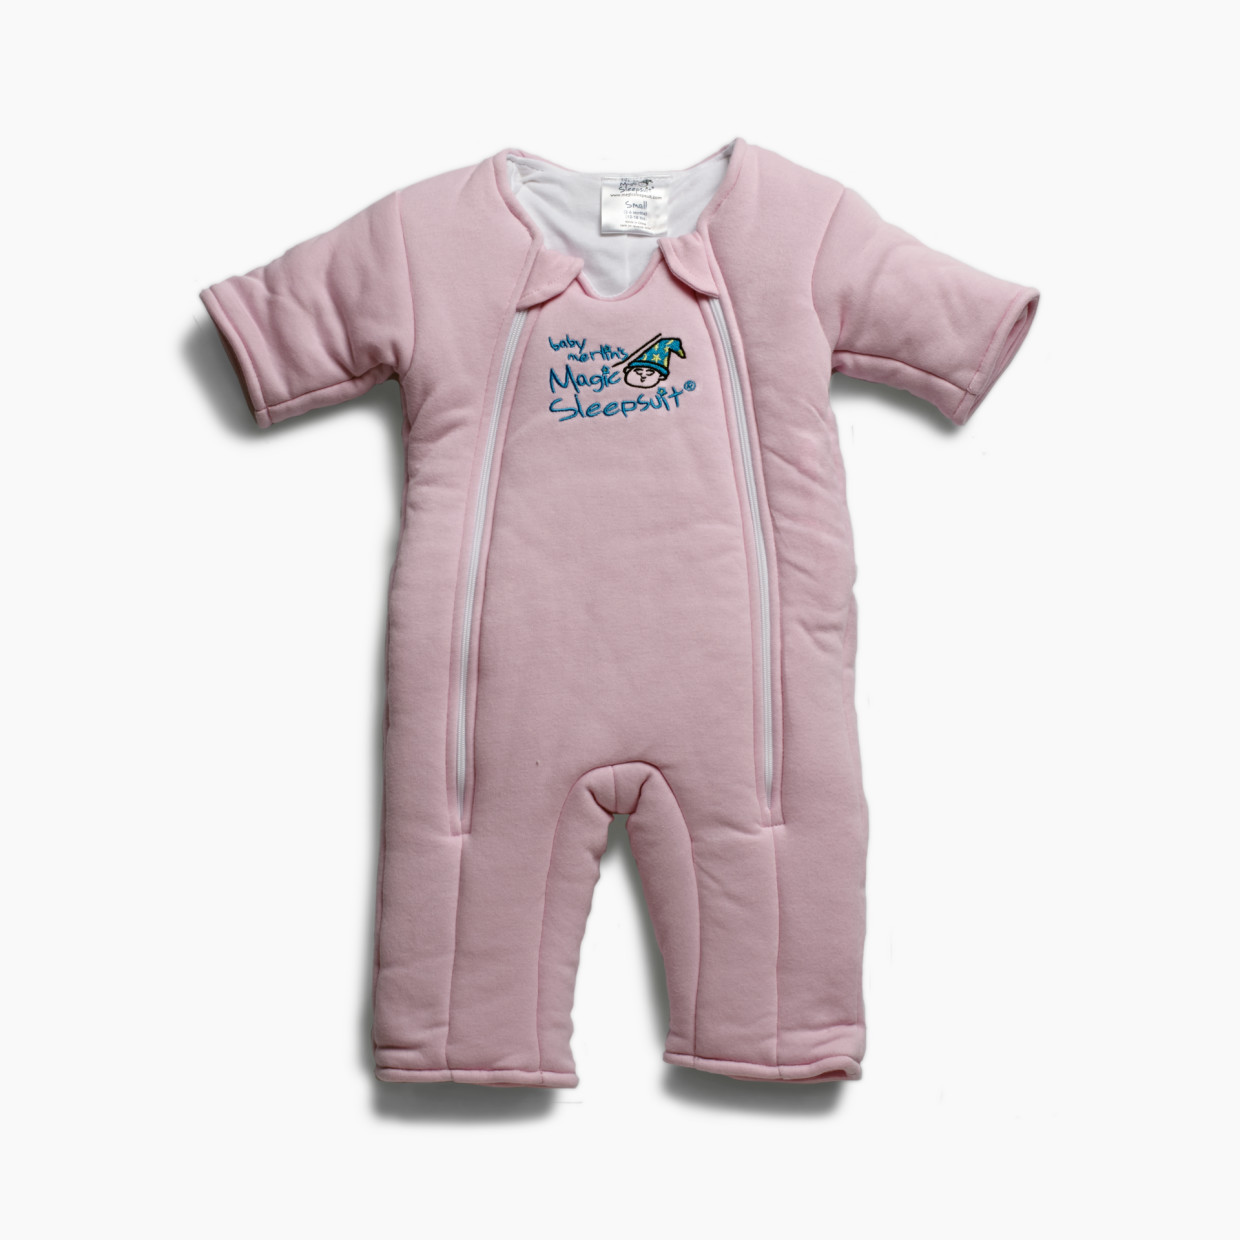 Baby Merlin's Magic Sleepsuit Cotton Swaddle Transition Product - Pink, 6-9 Months.